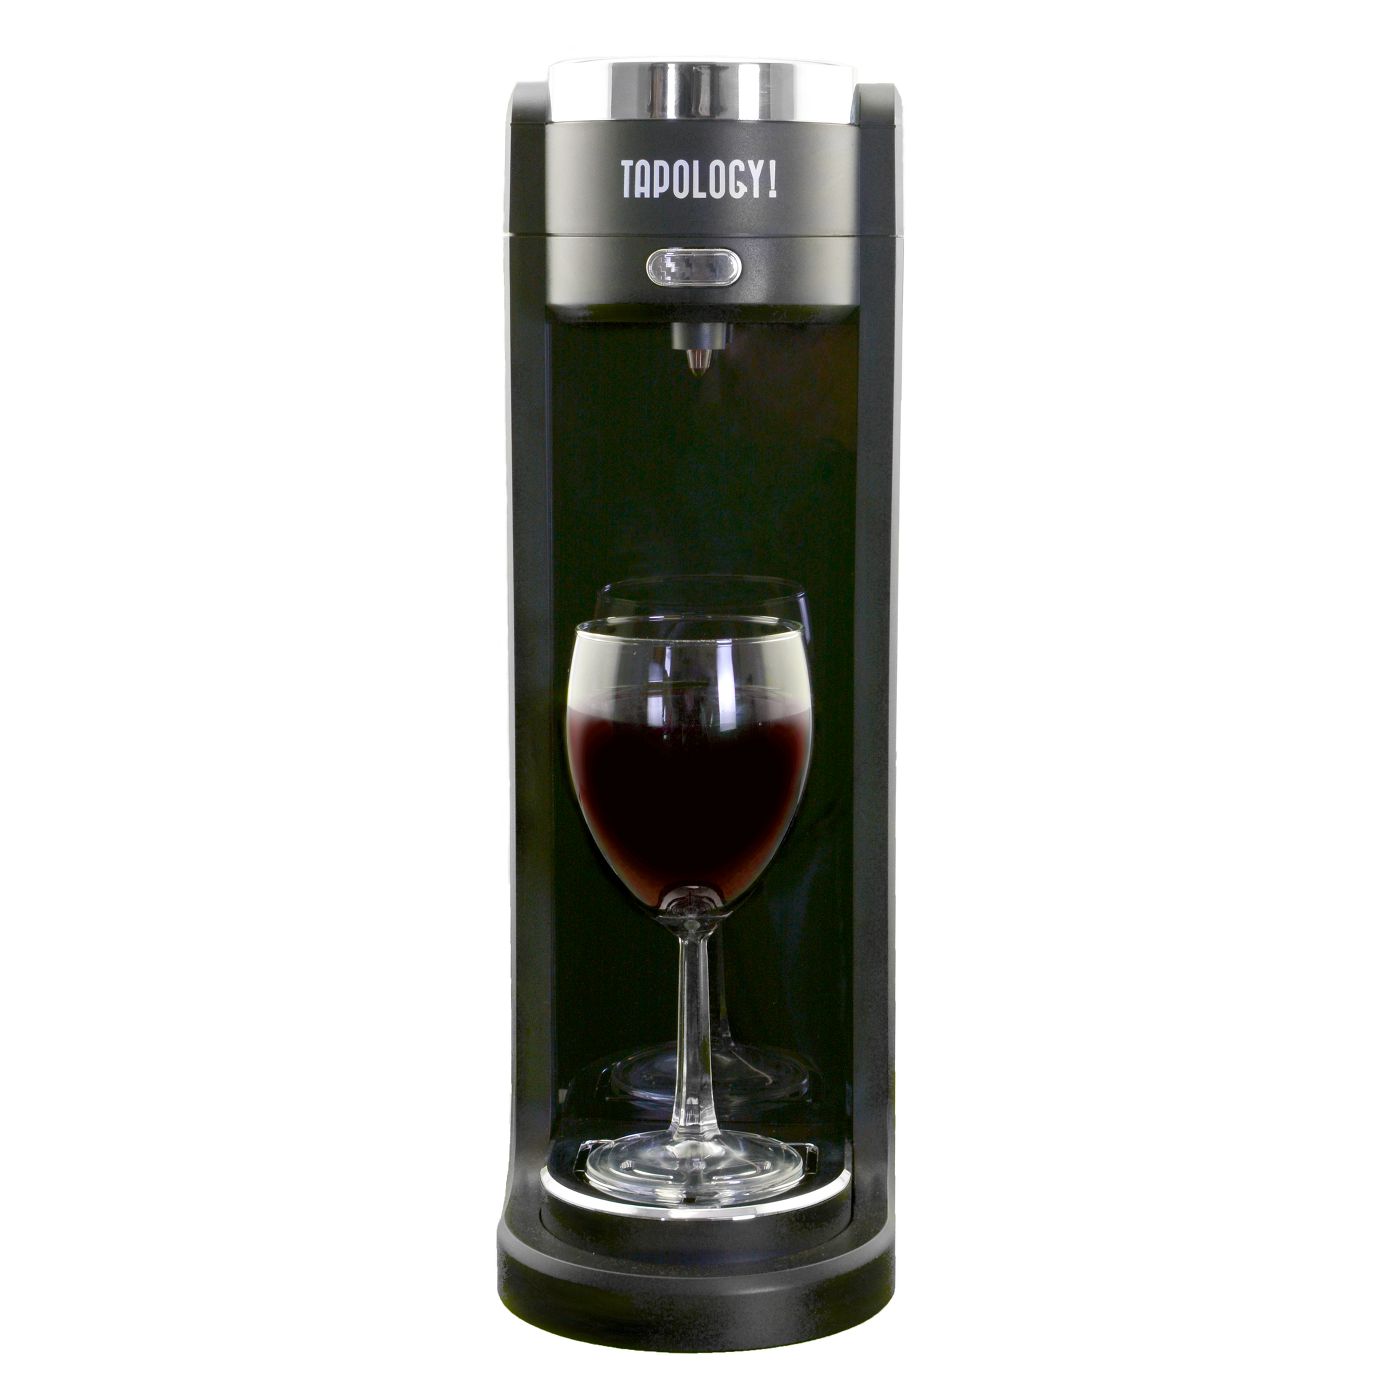 Tapology Wine Ventilator- best gifts for moms